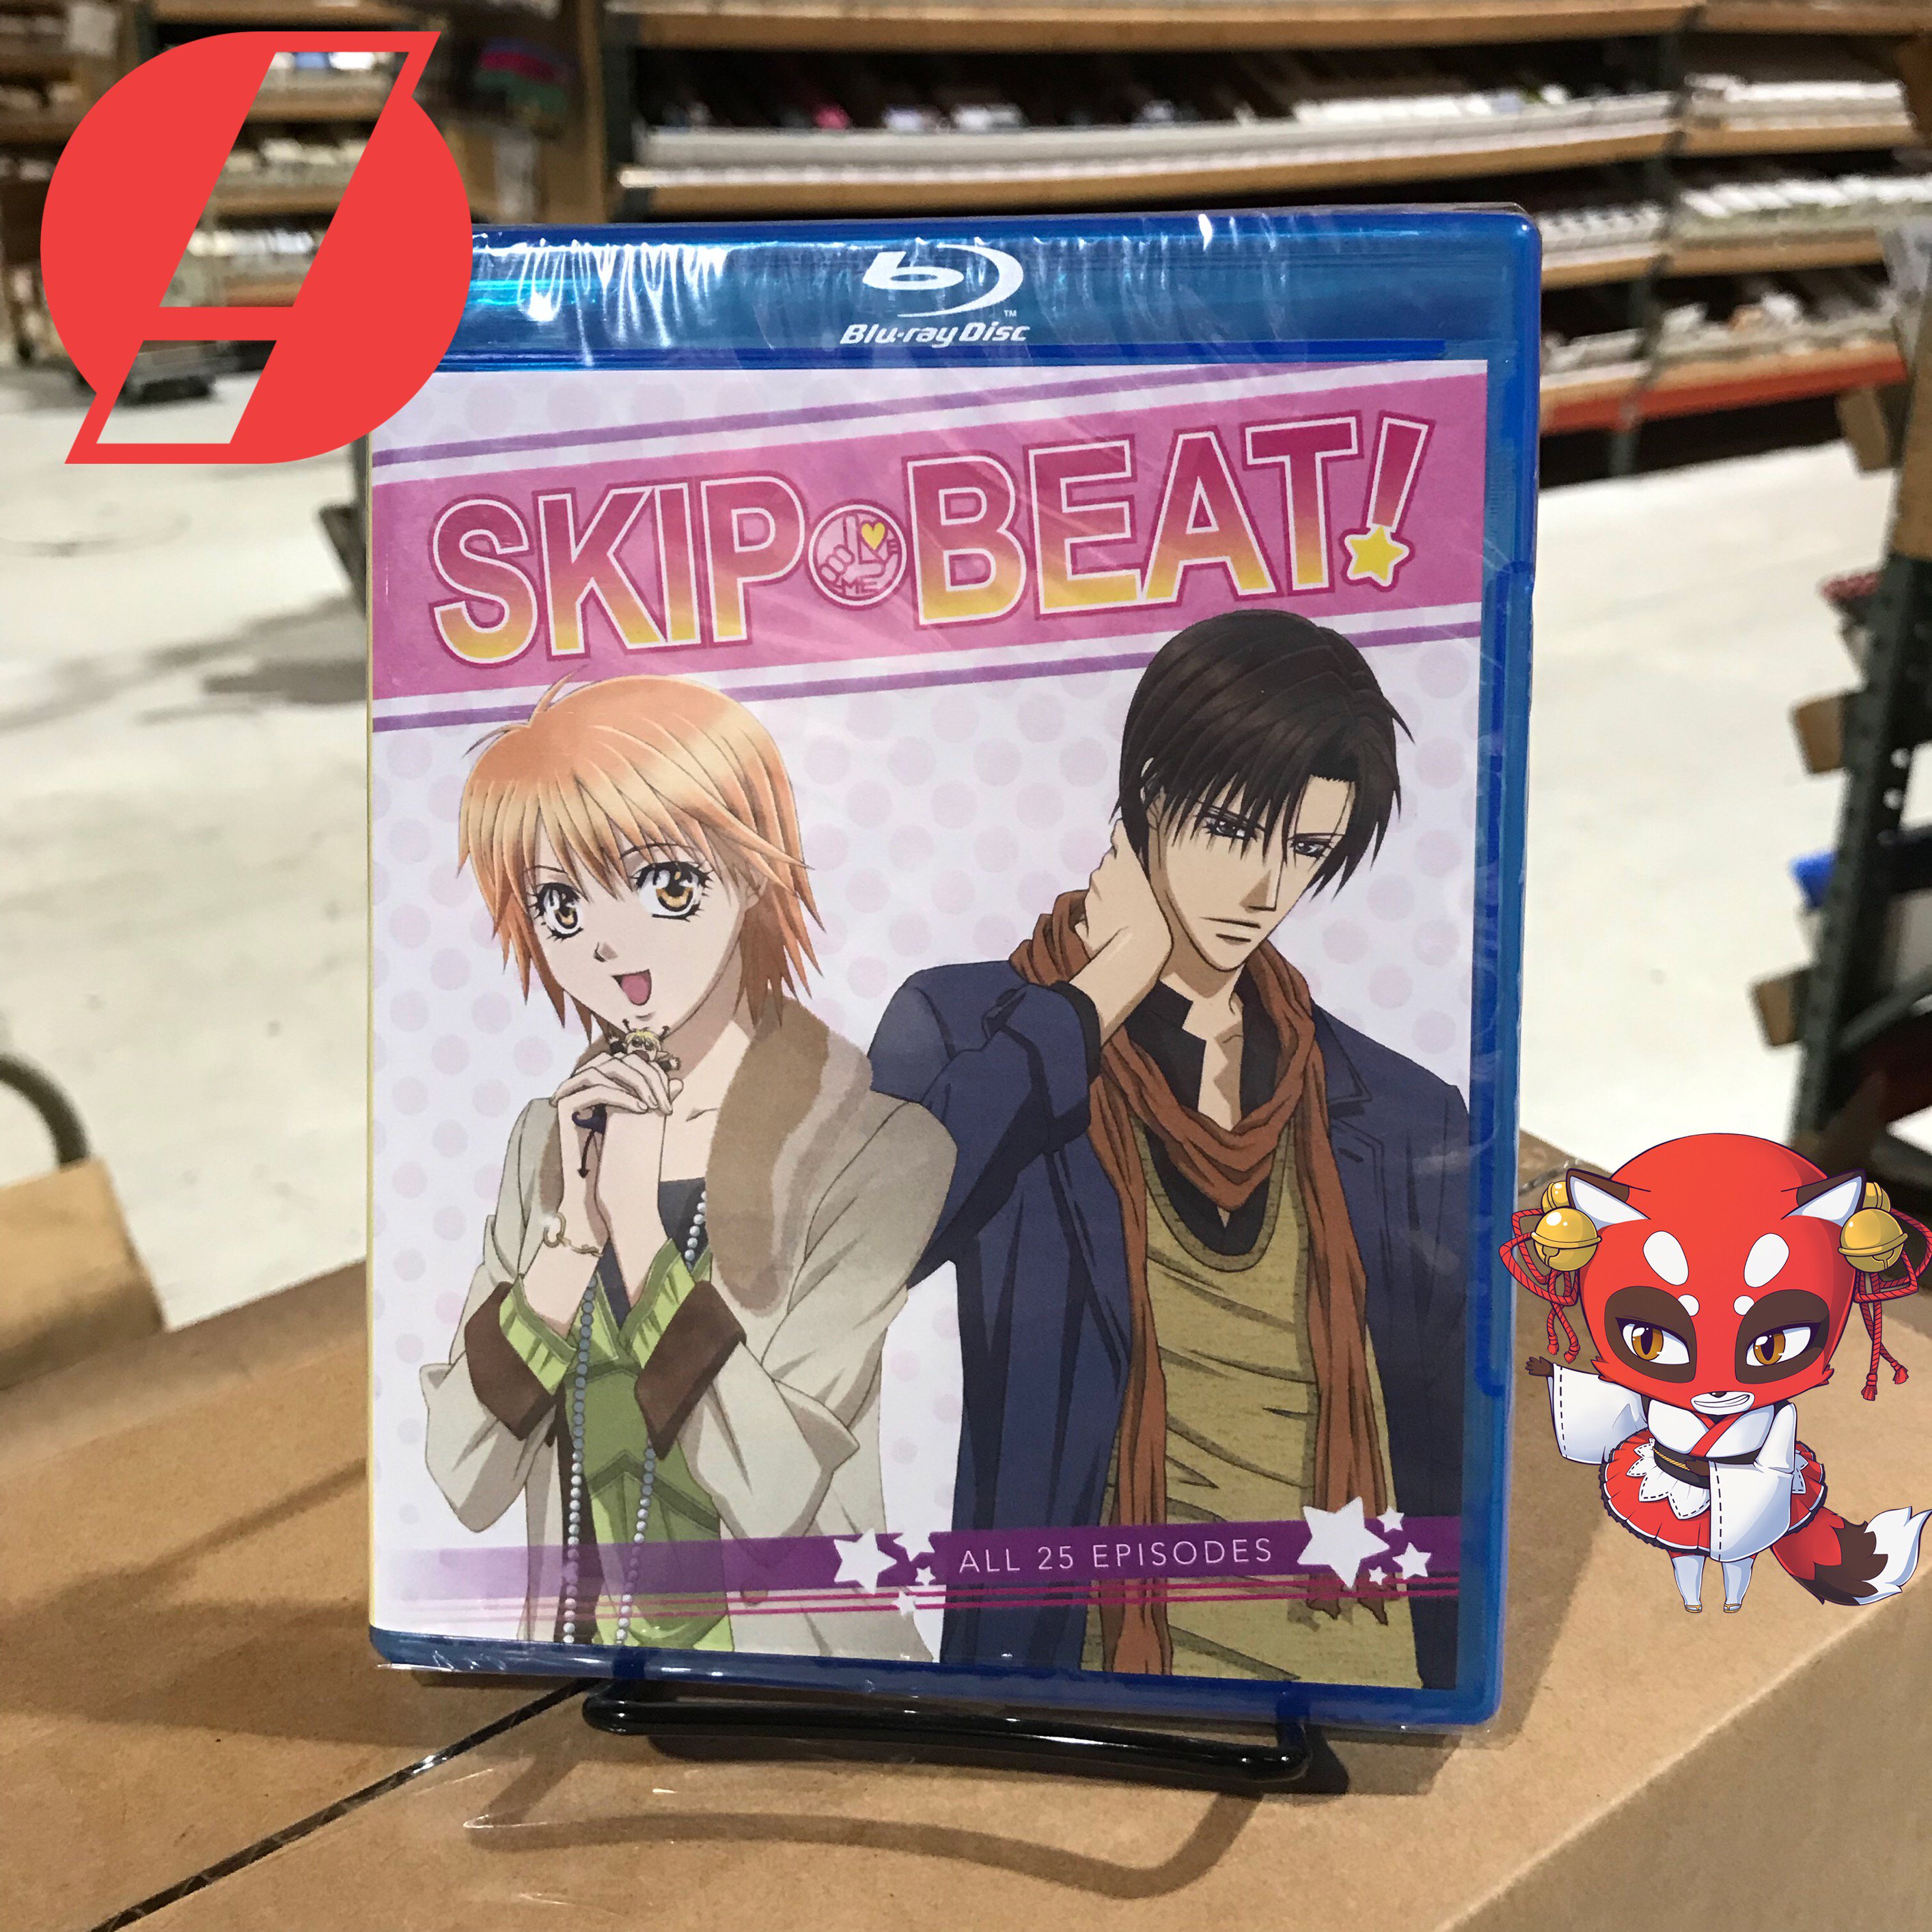 Right Stuf Anime on Twitter: "Skip Beat! contains episodes and is based on the best-selling shojo manga by Yoshiki Nakamura. Skip Beat! Blu-ray is exclusive to Right Stuf Anime ~~ In